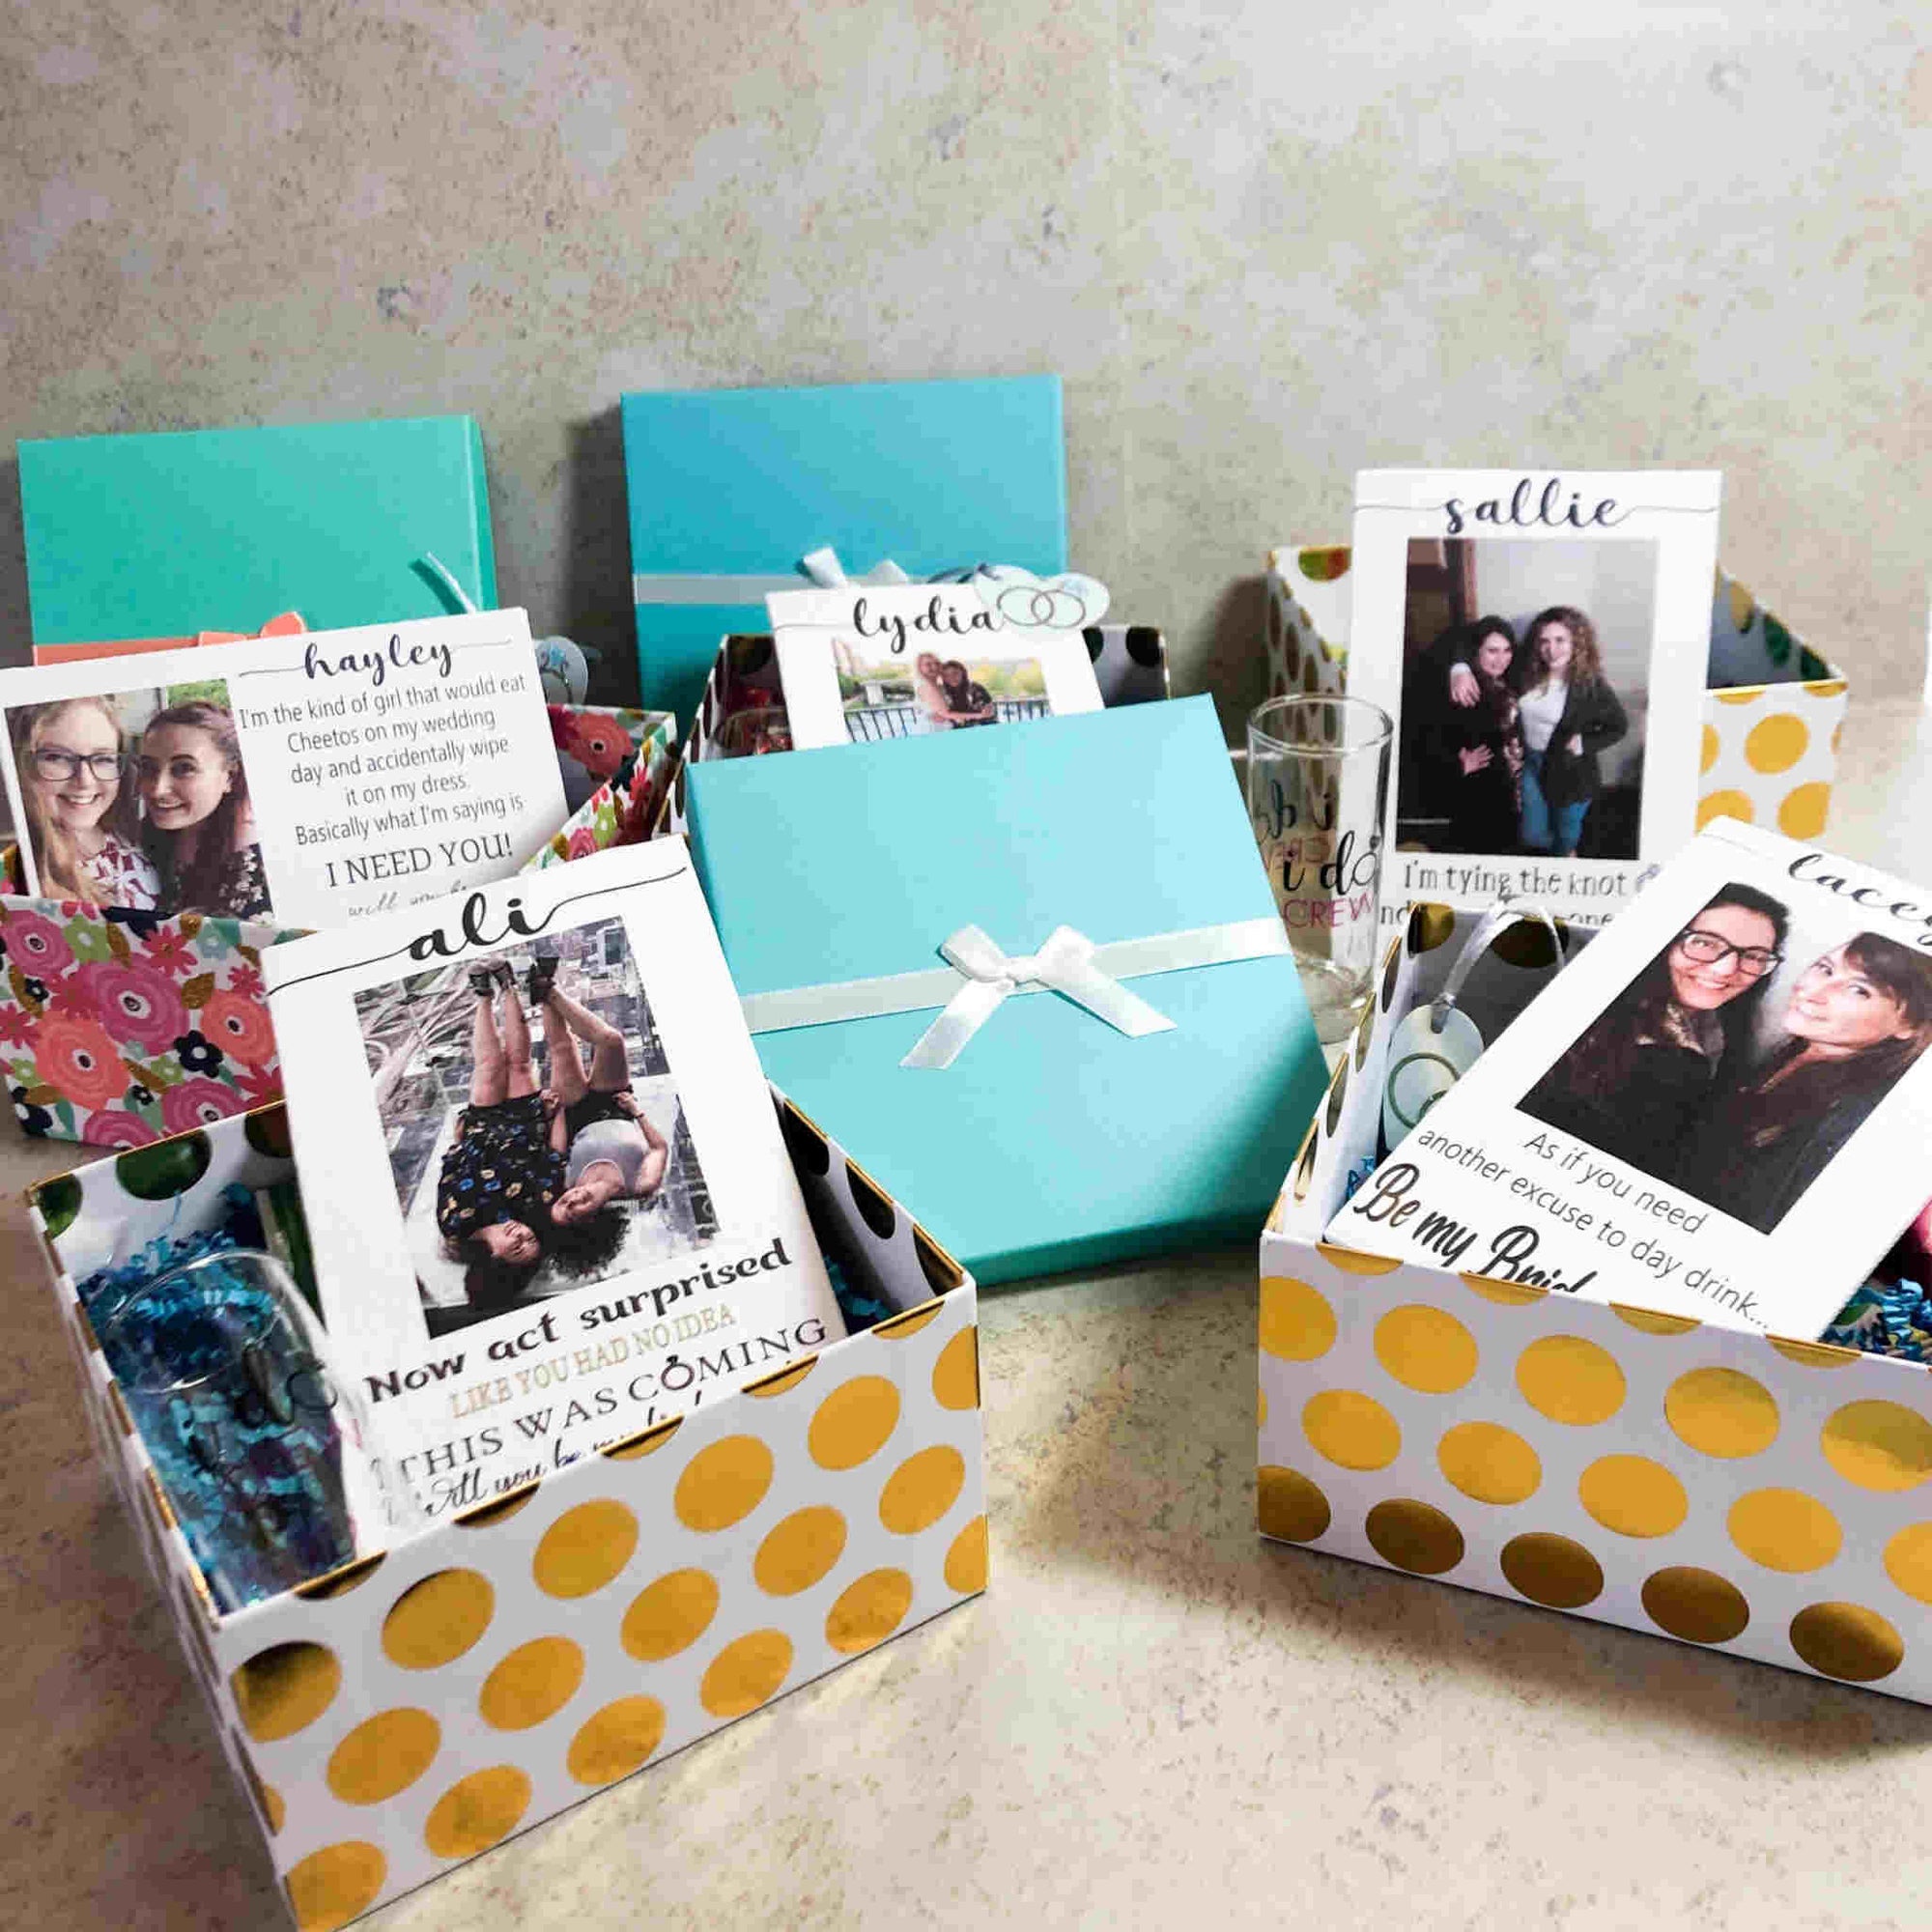 Add these enchanting gifts to formally ask your wedding attendants to take their place on your special day. Designed using personalized photo canvas' with customized wording on each to fit the couple's attendant.